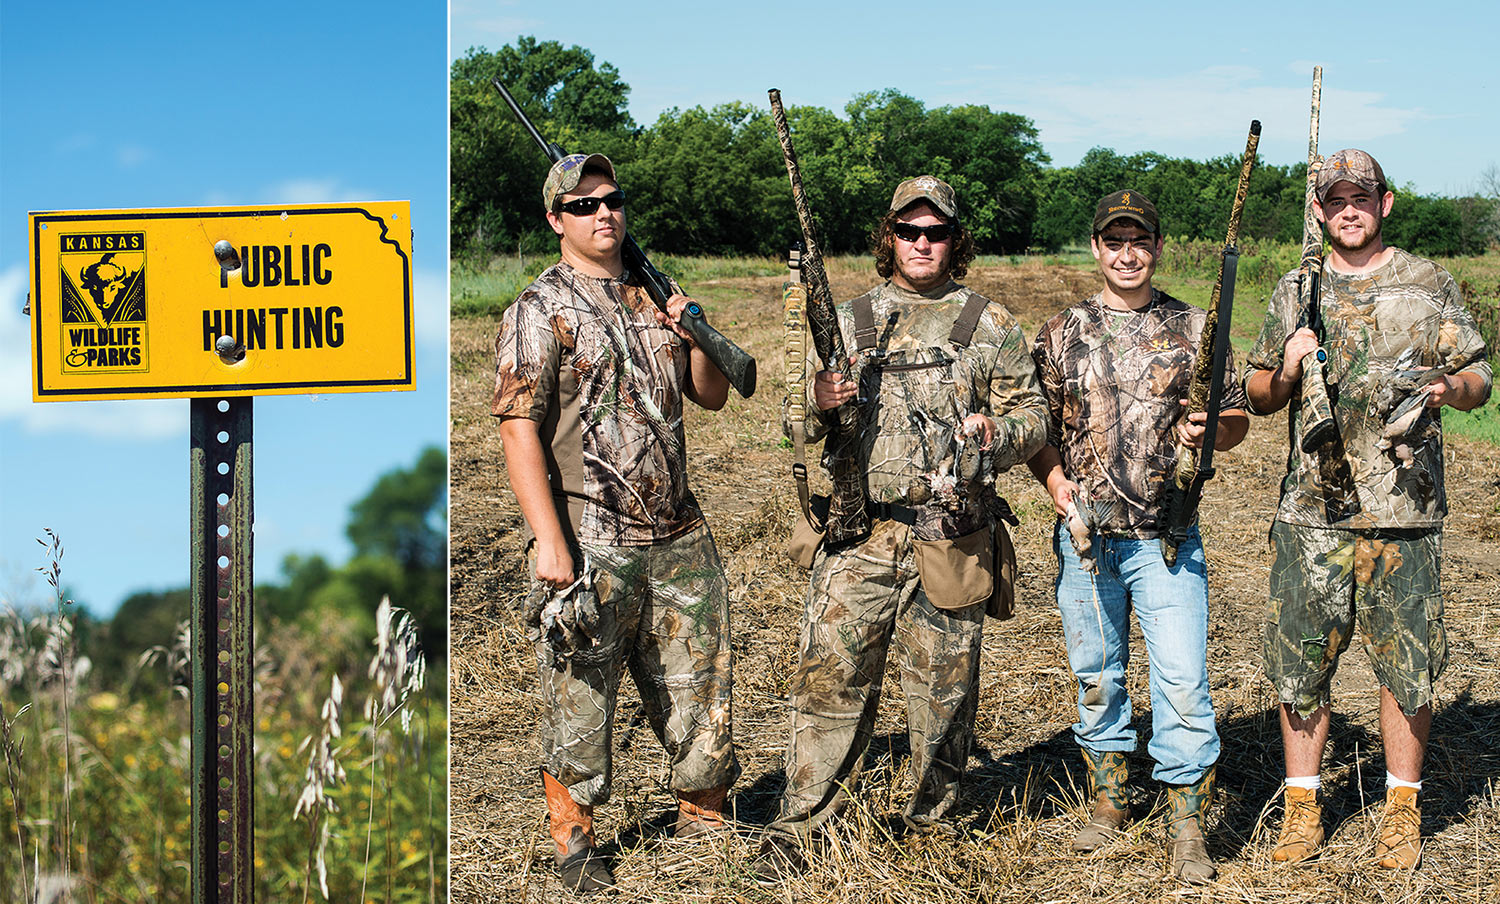 diptych: Kansas "public hunting" sign on post, and four dove hunters with shotguns in field